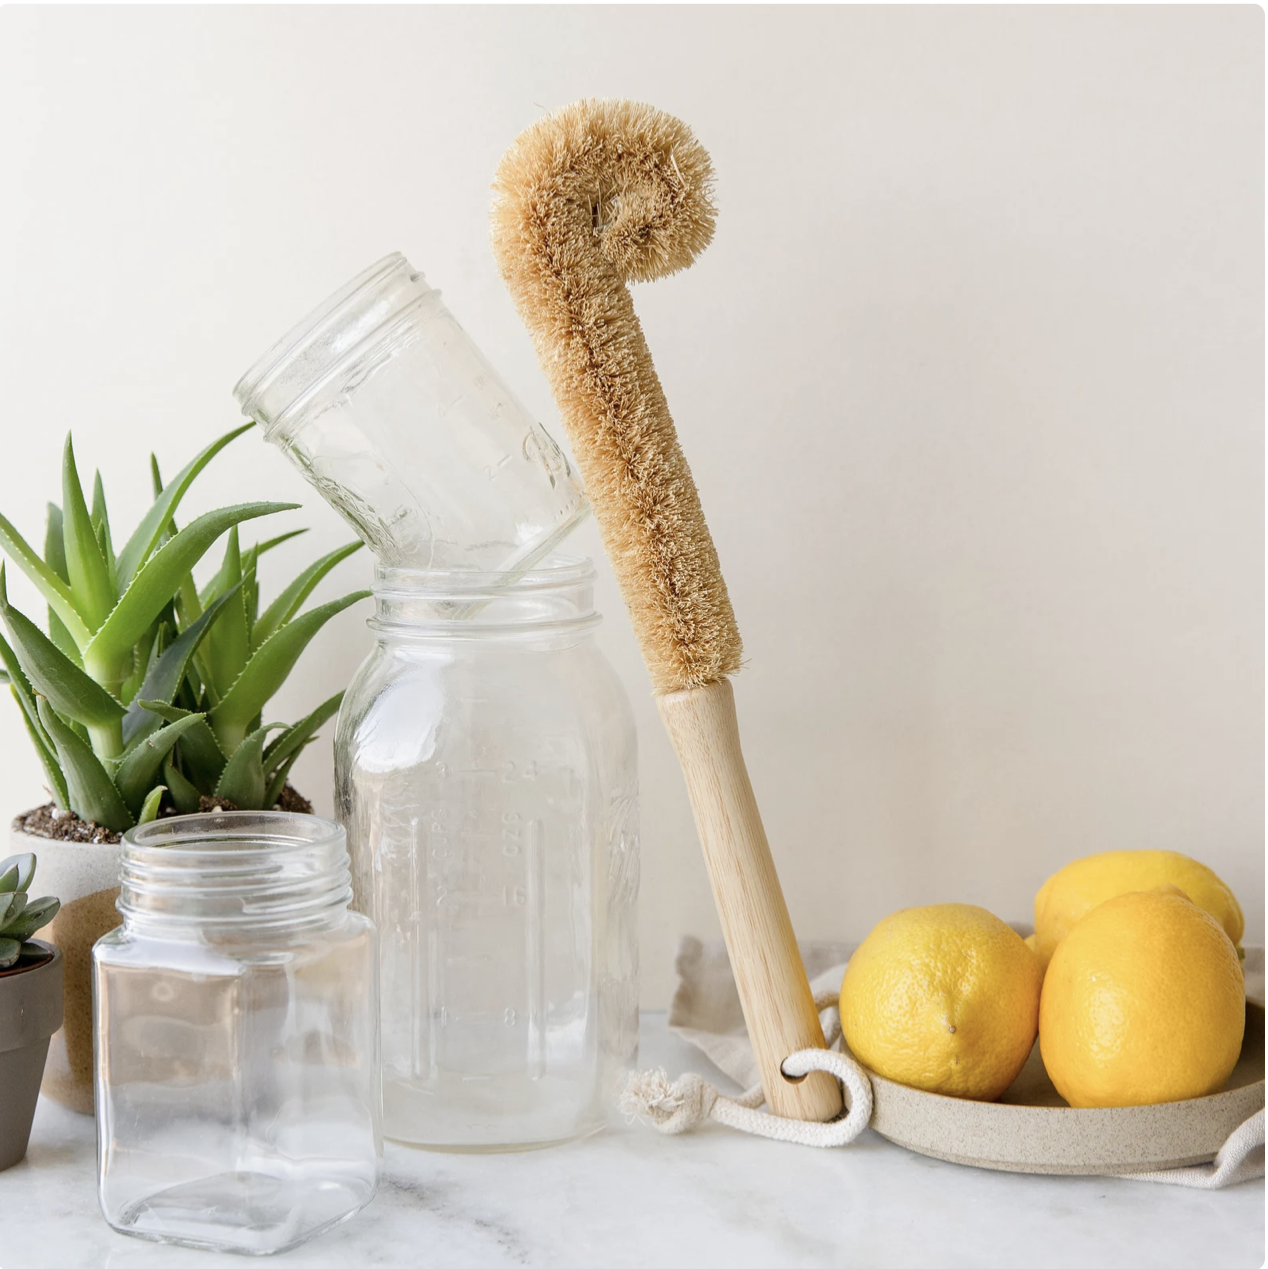 https://cdn.shopify.com/s/files/1/0101/0142/products/Bamboo_CoconutBottleBrush-Eco-friendly_Plant-based_SustainableCleaningBrush-EarthAhead-GoodsthatMatter-NewOrleans.png?v=1658971610